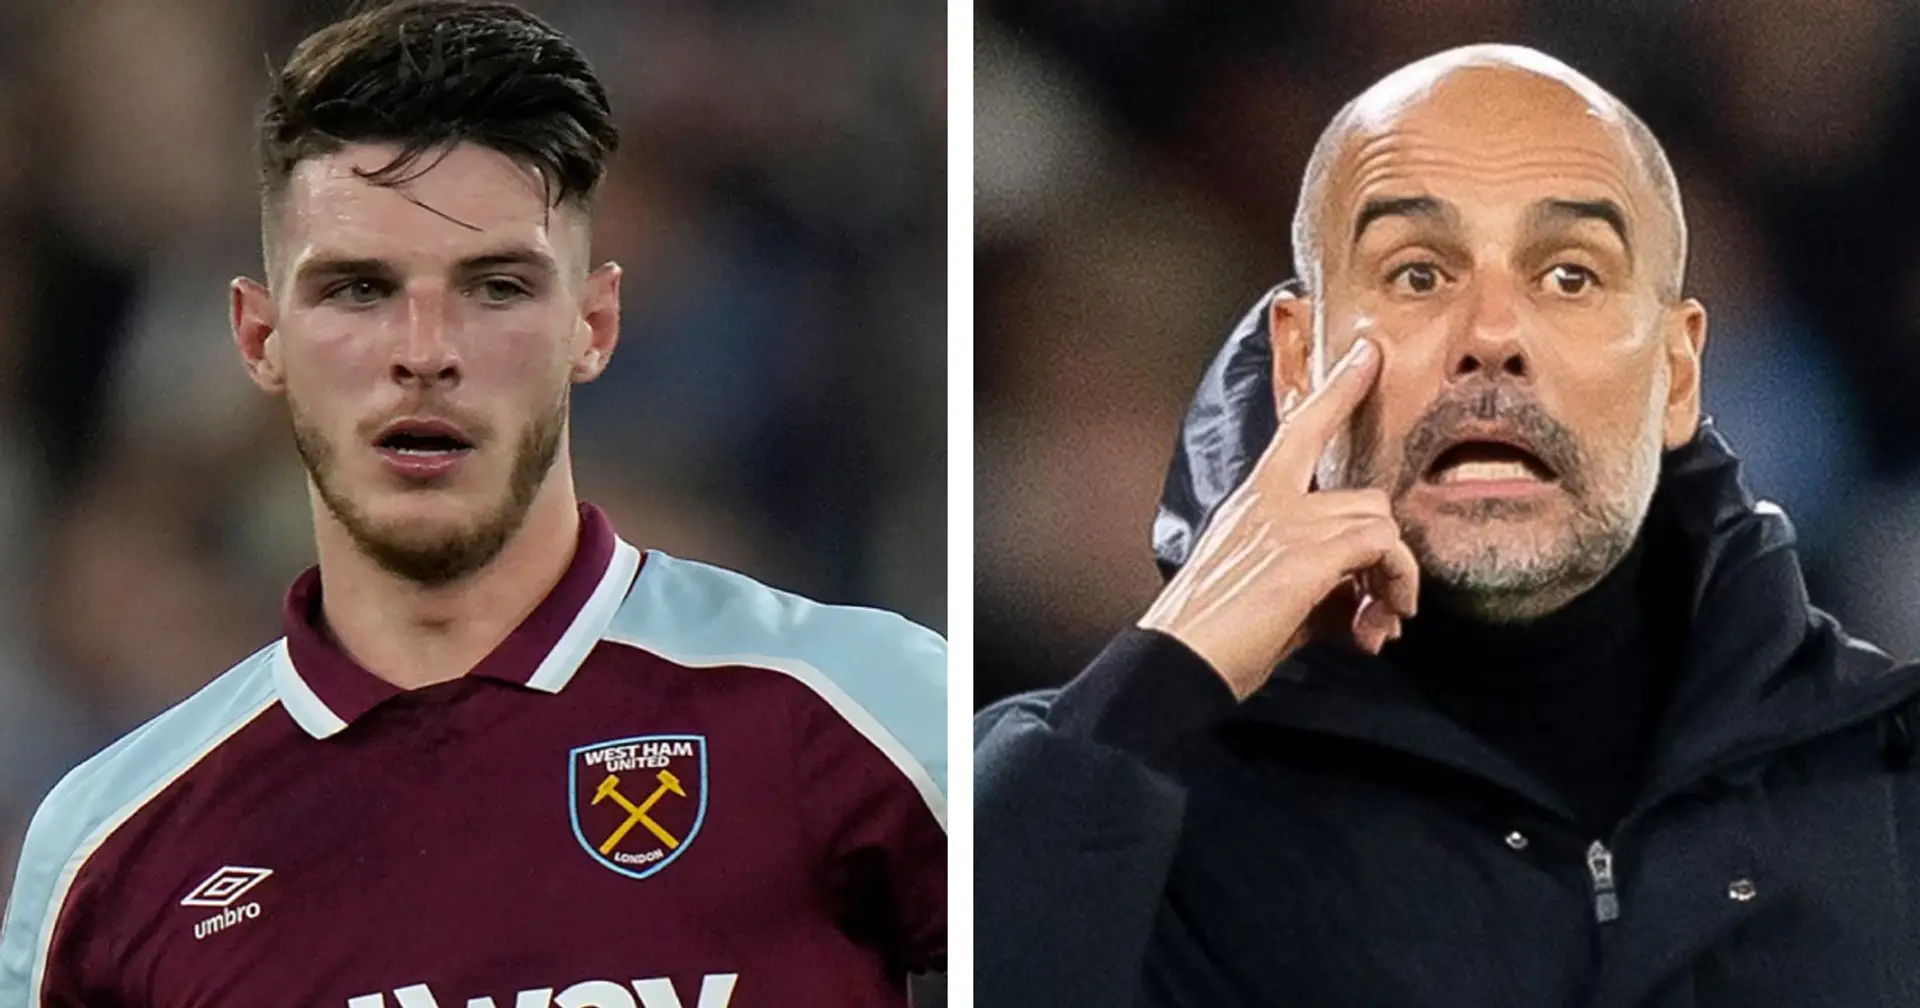 'Man United have lost their appeal, he should go to Man City': Declan Rice told to snub Old Trafford move